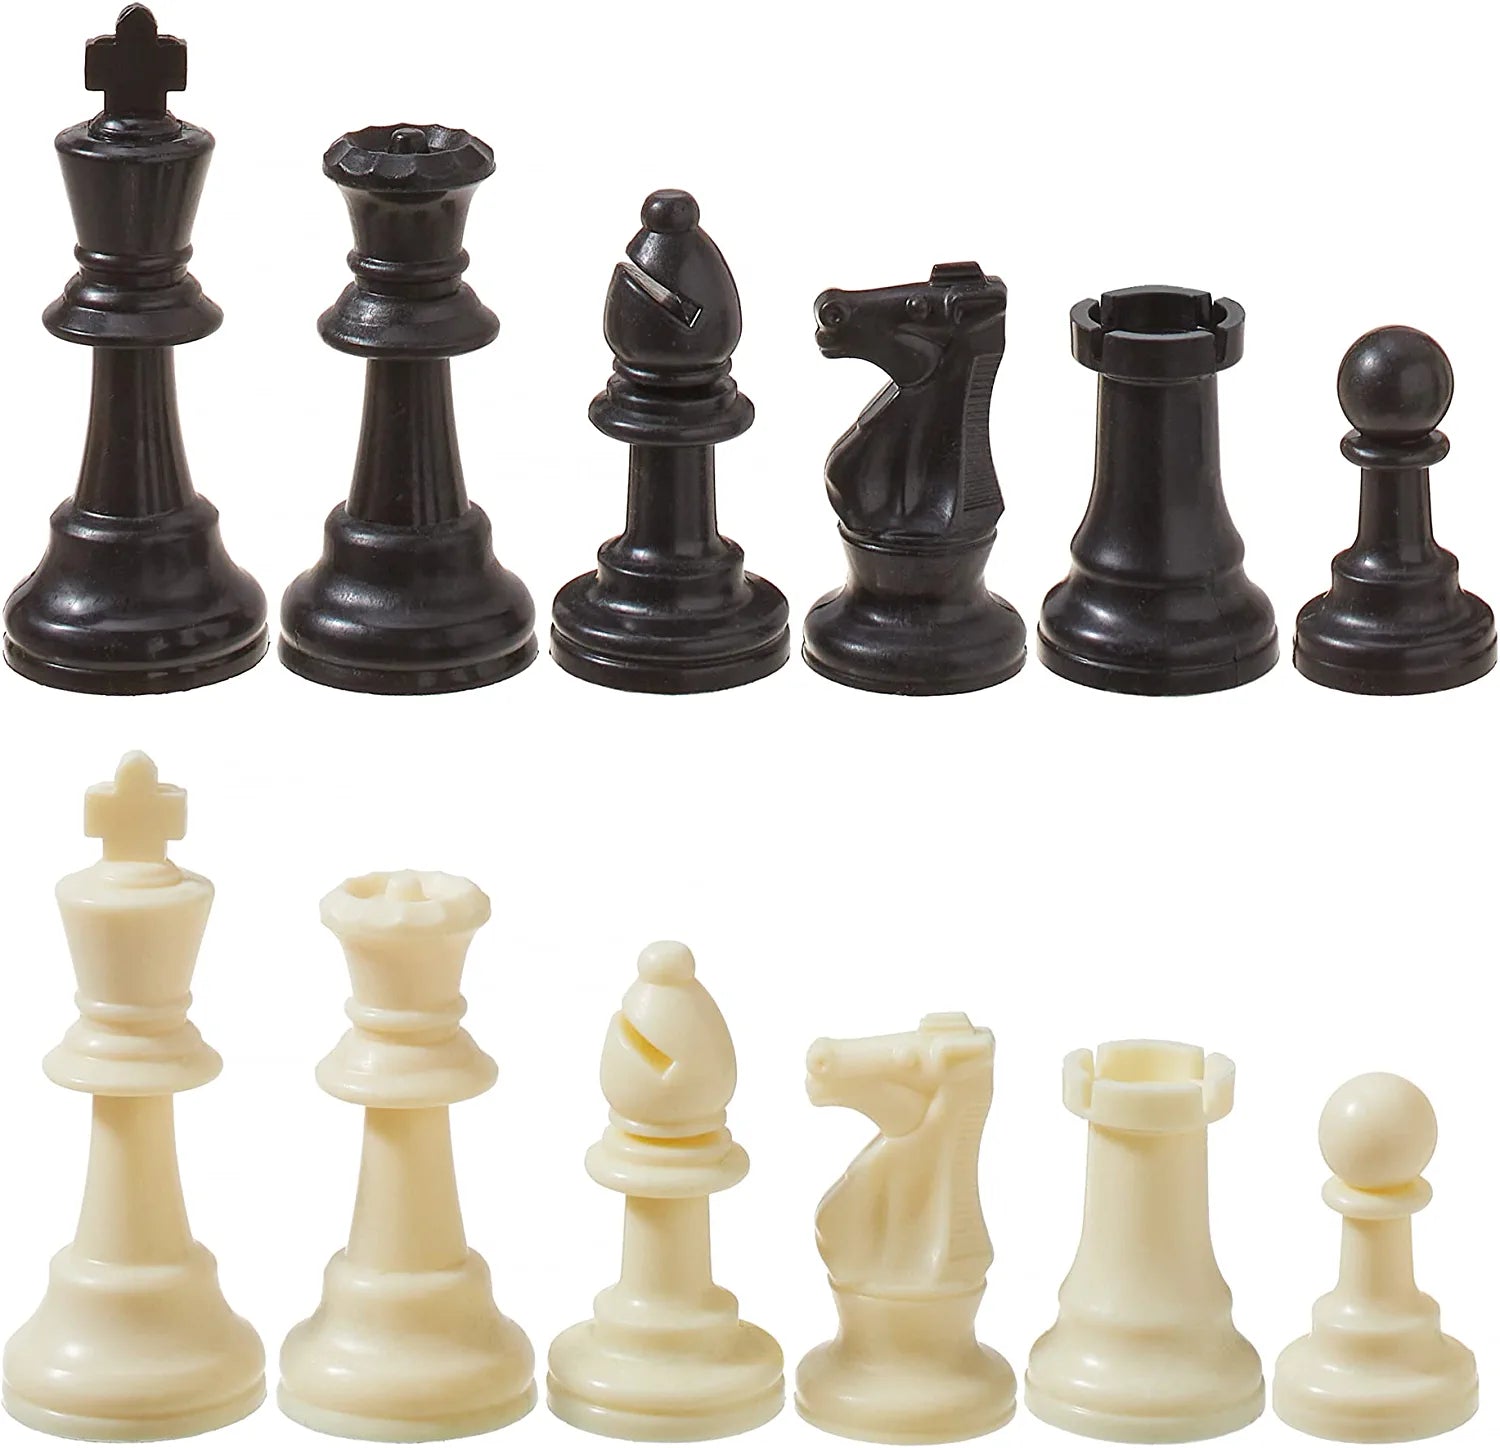 The d'pawn Chess Academy